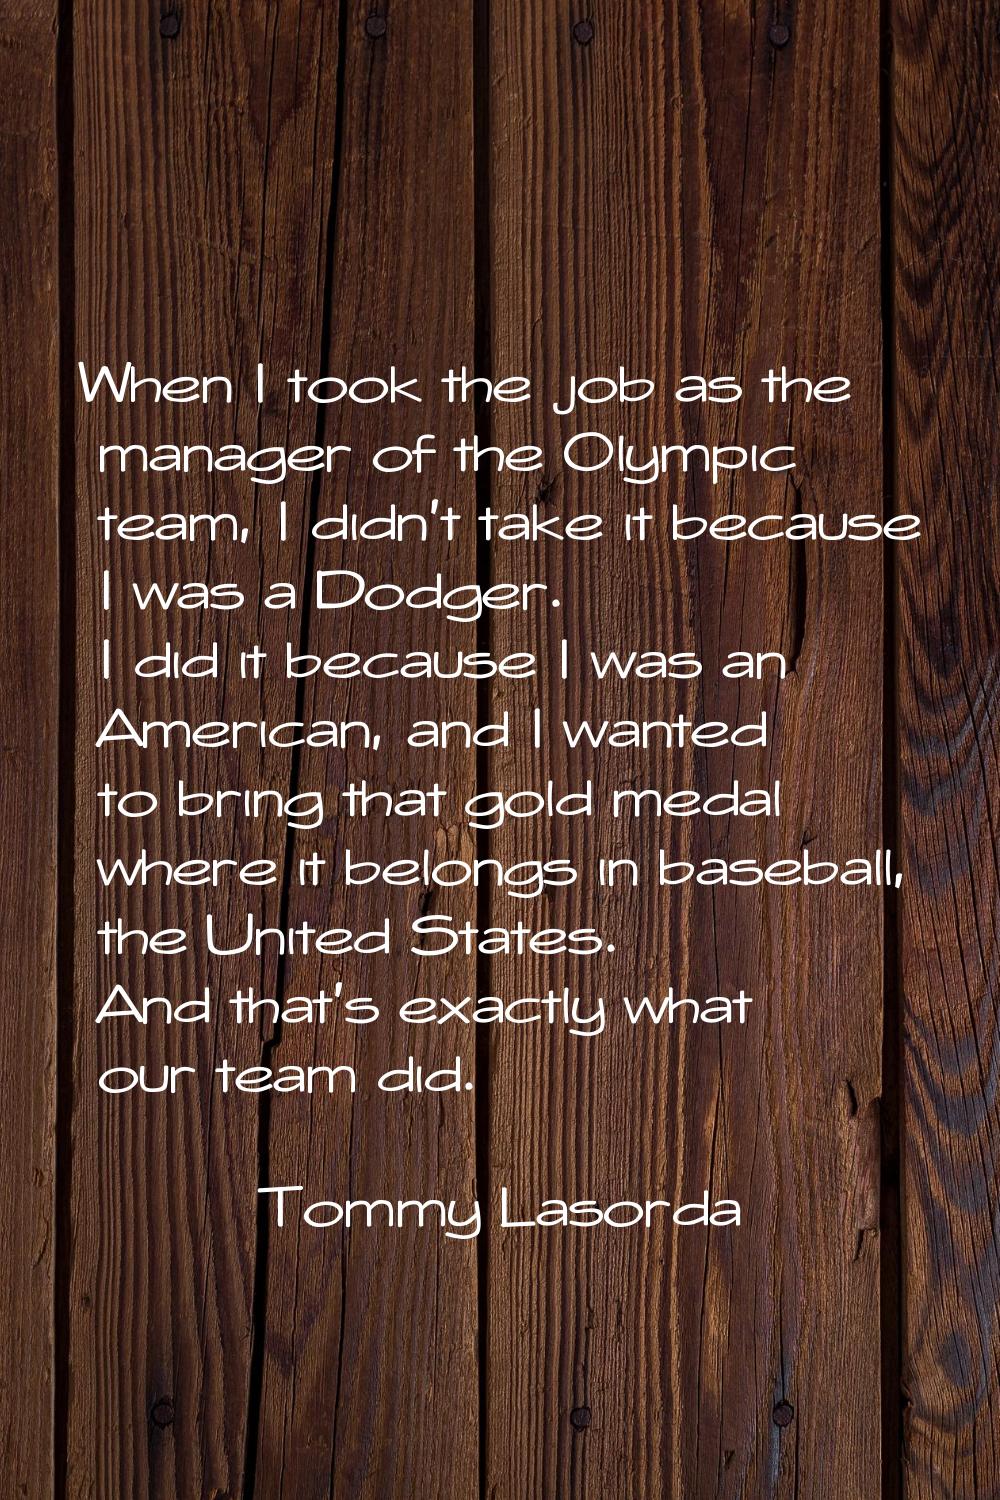 When I took the job as the manager of the Olympic team, I didn't take it because I was a Dodger. I 